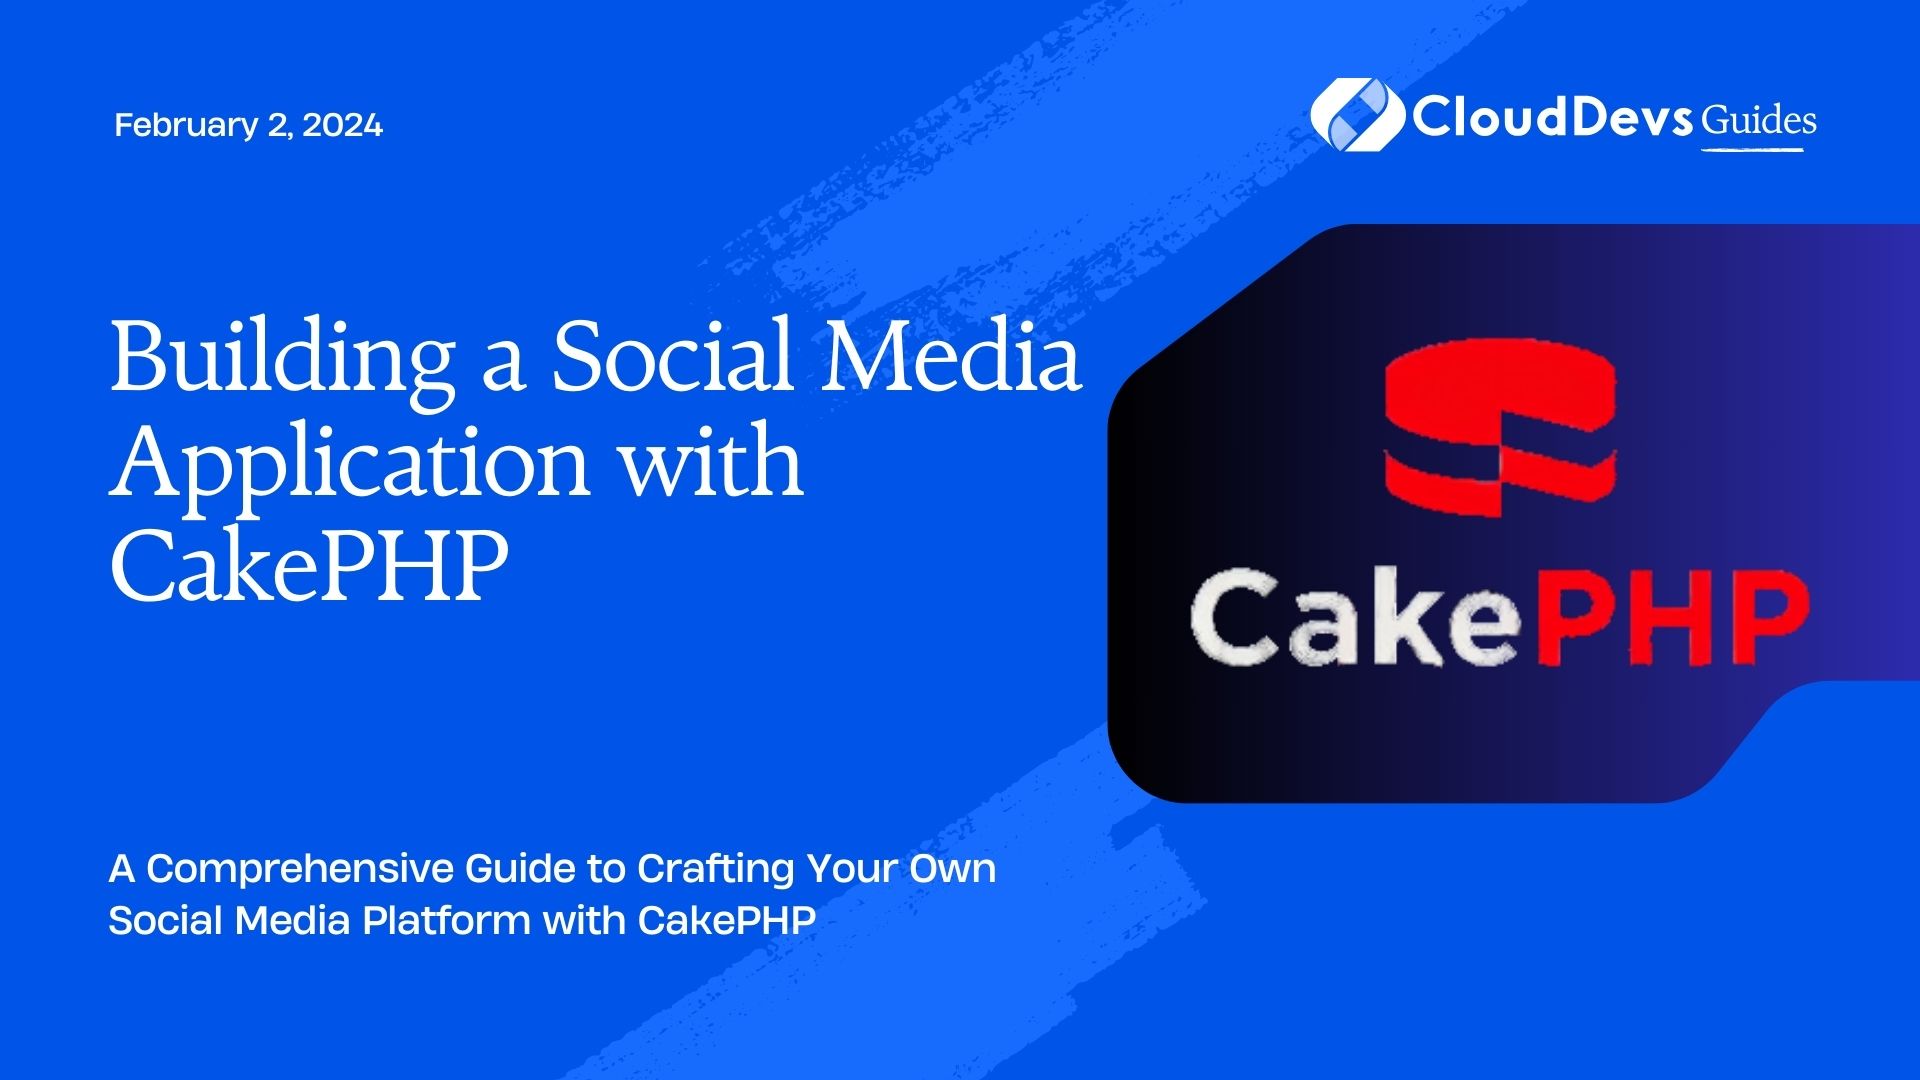 Building a Social Media Application with CakePHP